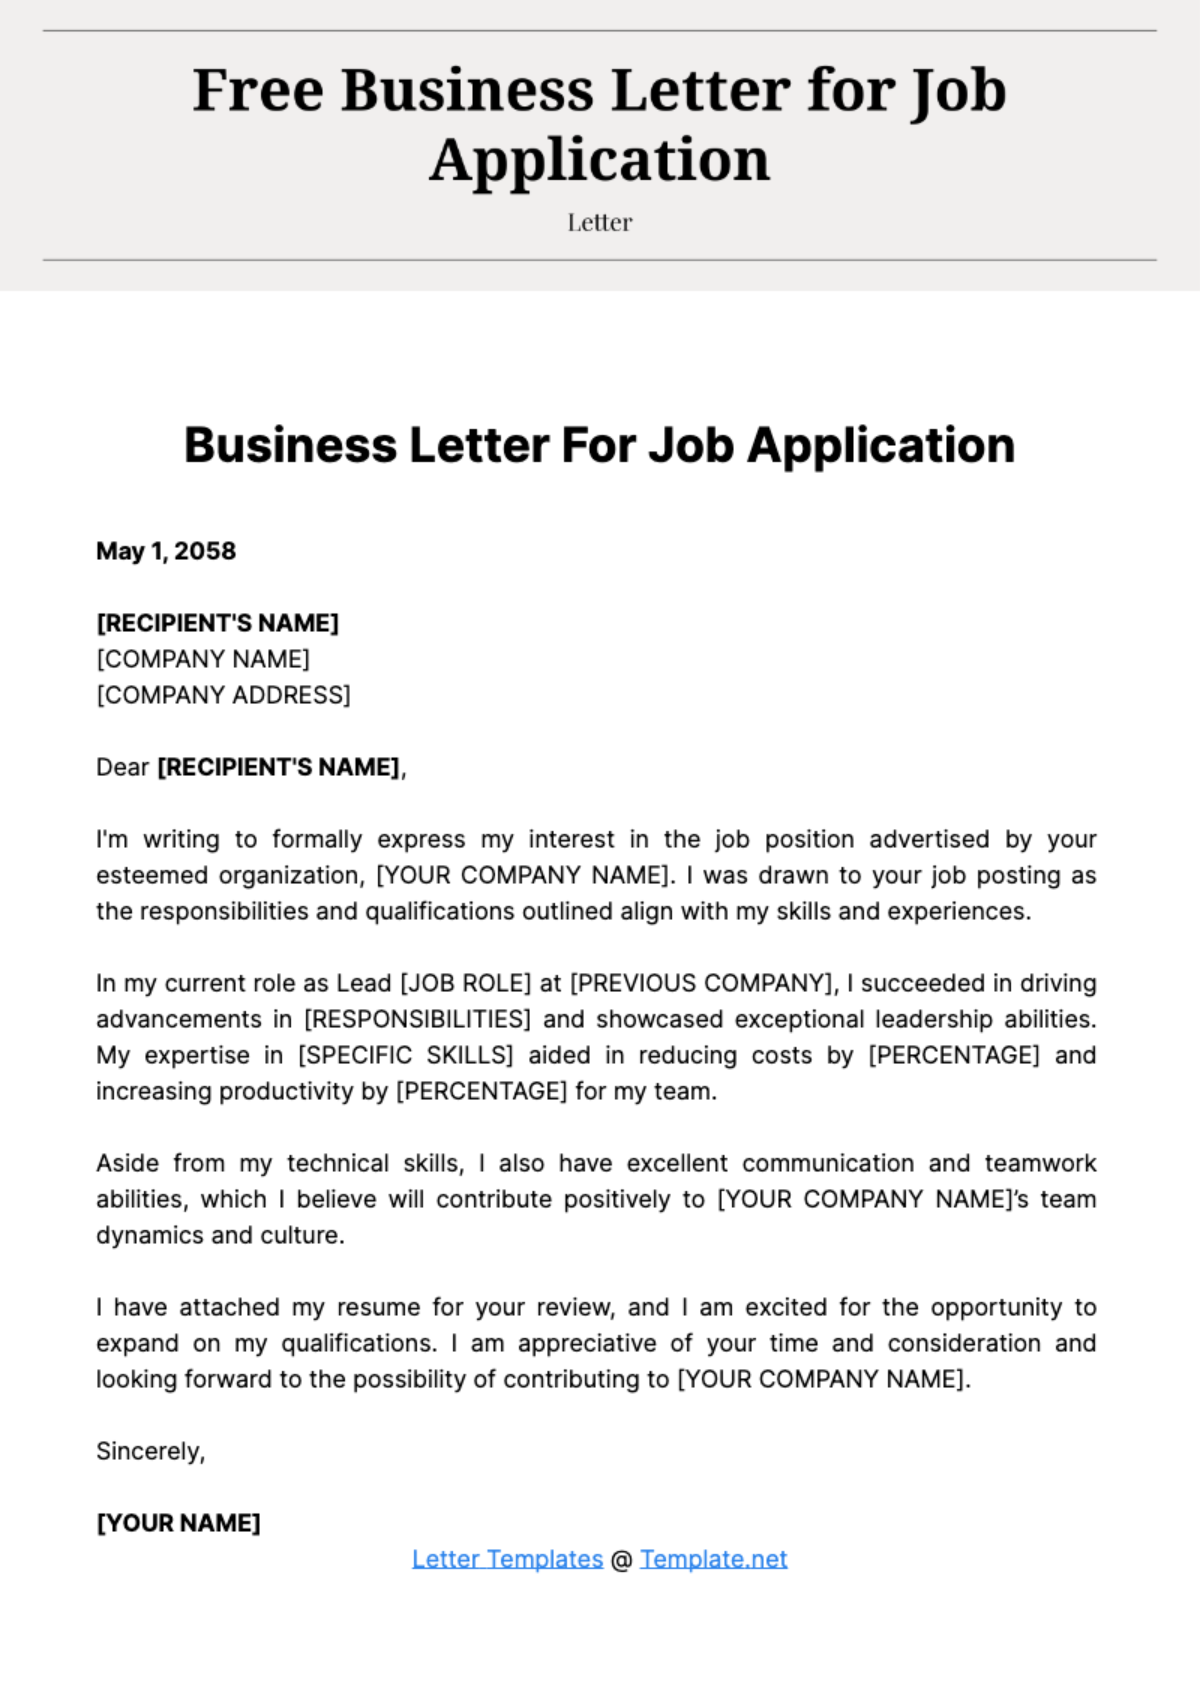 Free Business Letter for Job Application Template